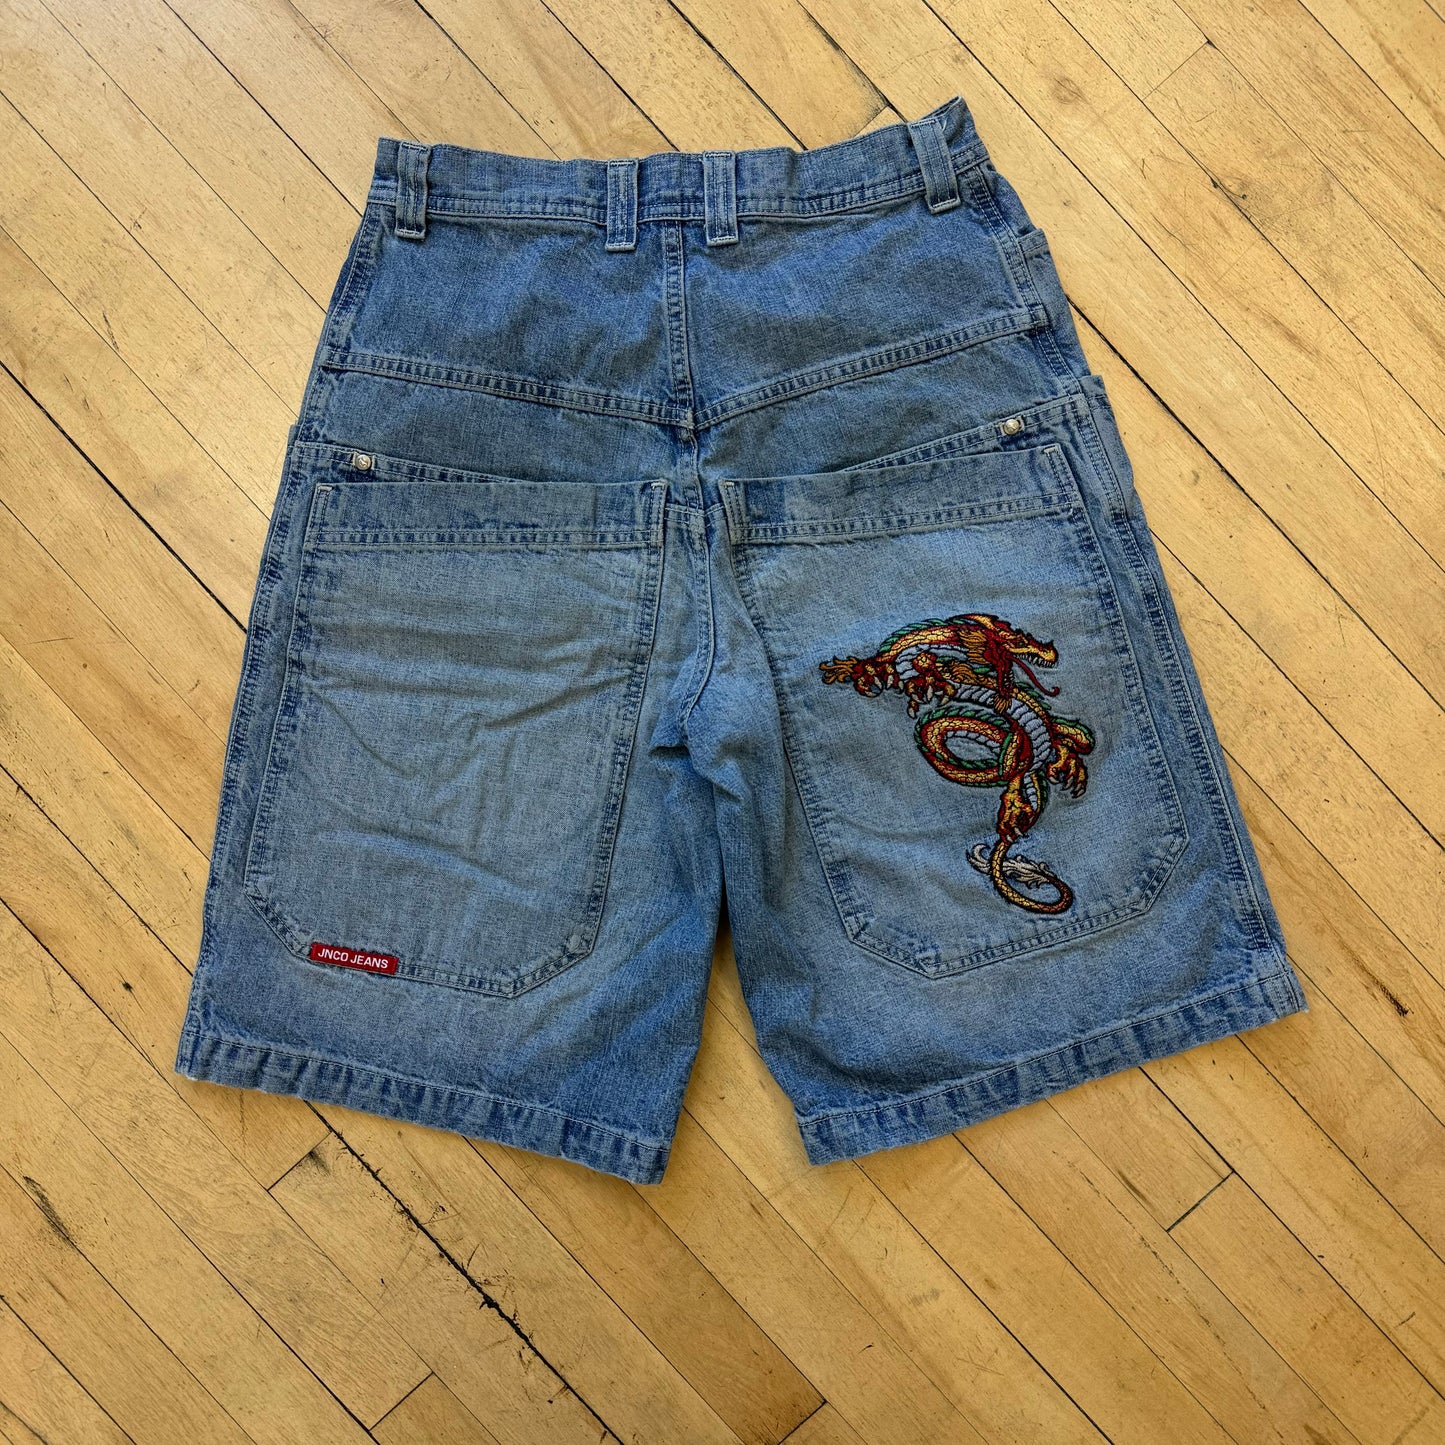 Vintage Embroidered Dragon Jnco Jean shorts Sz 31